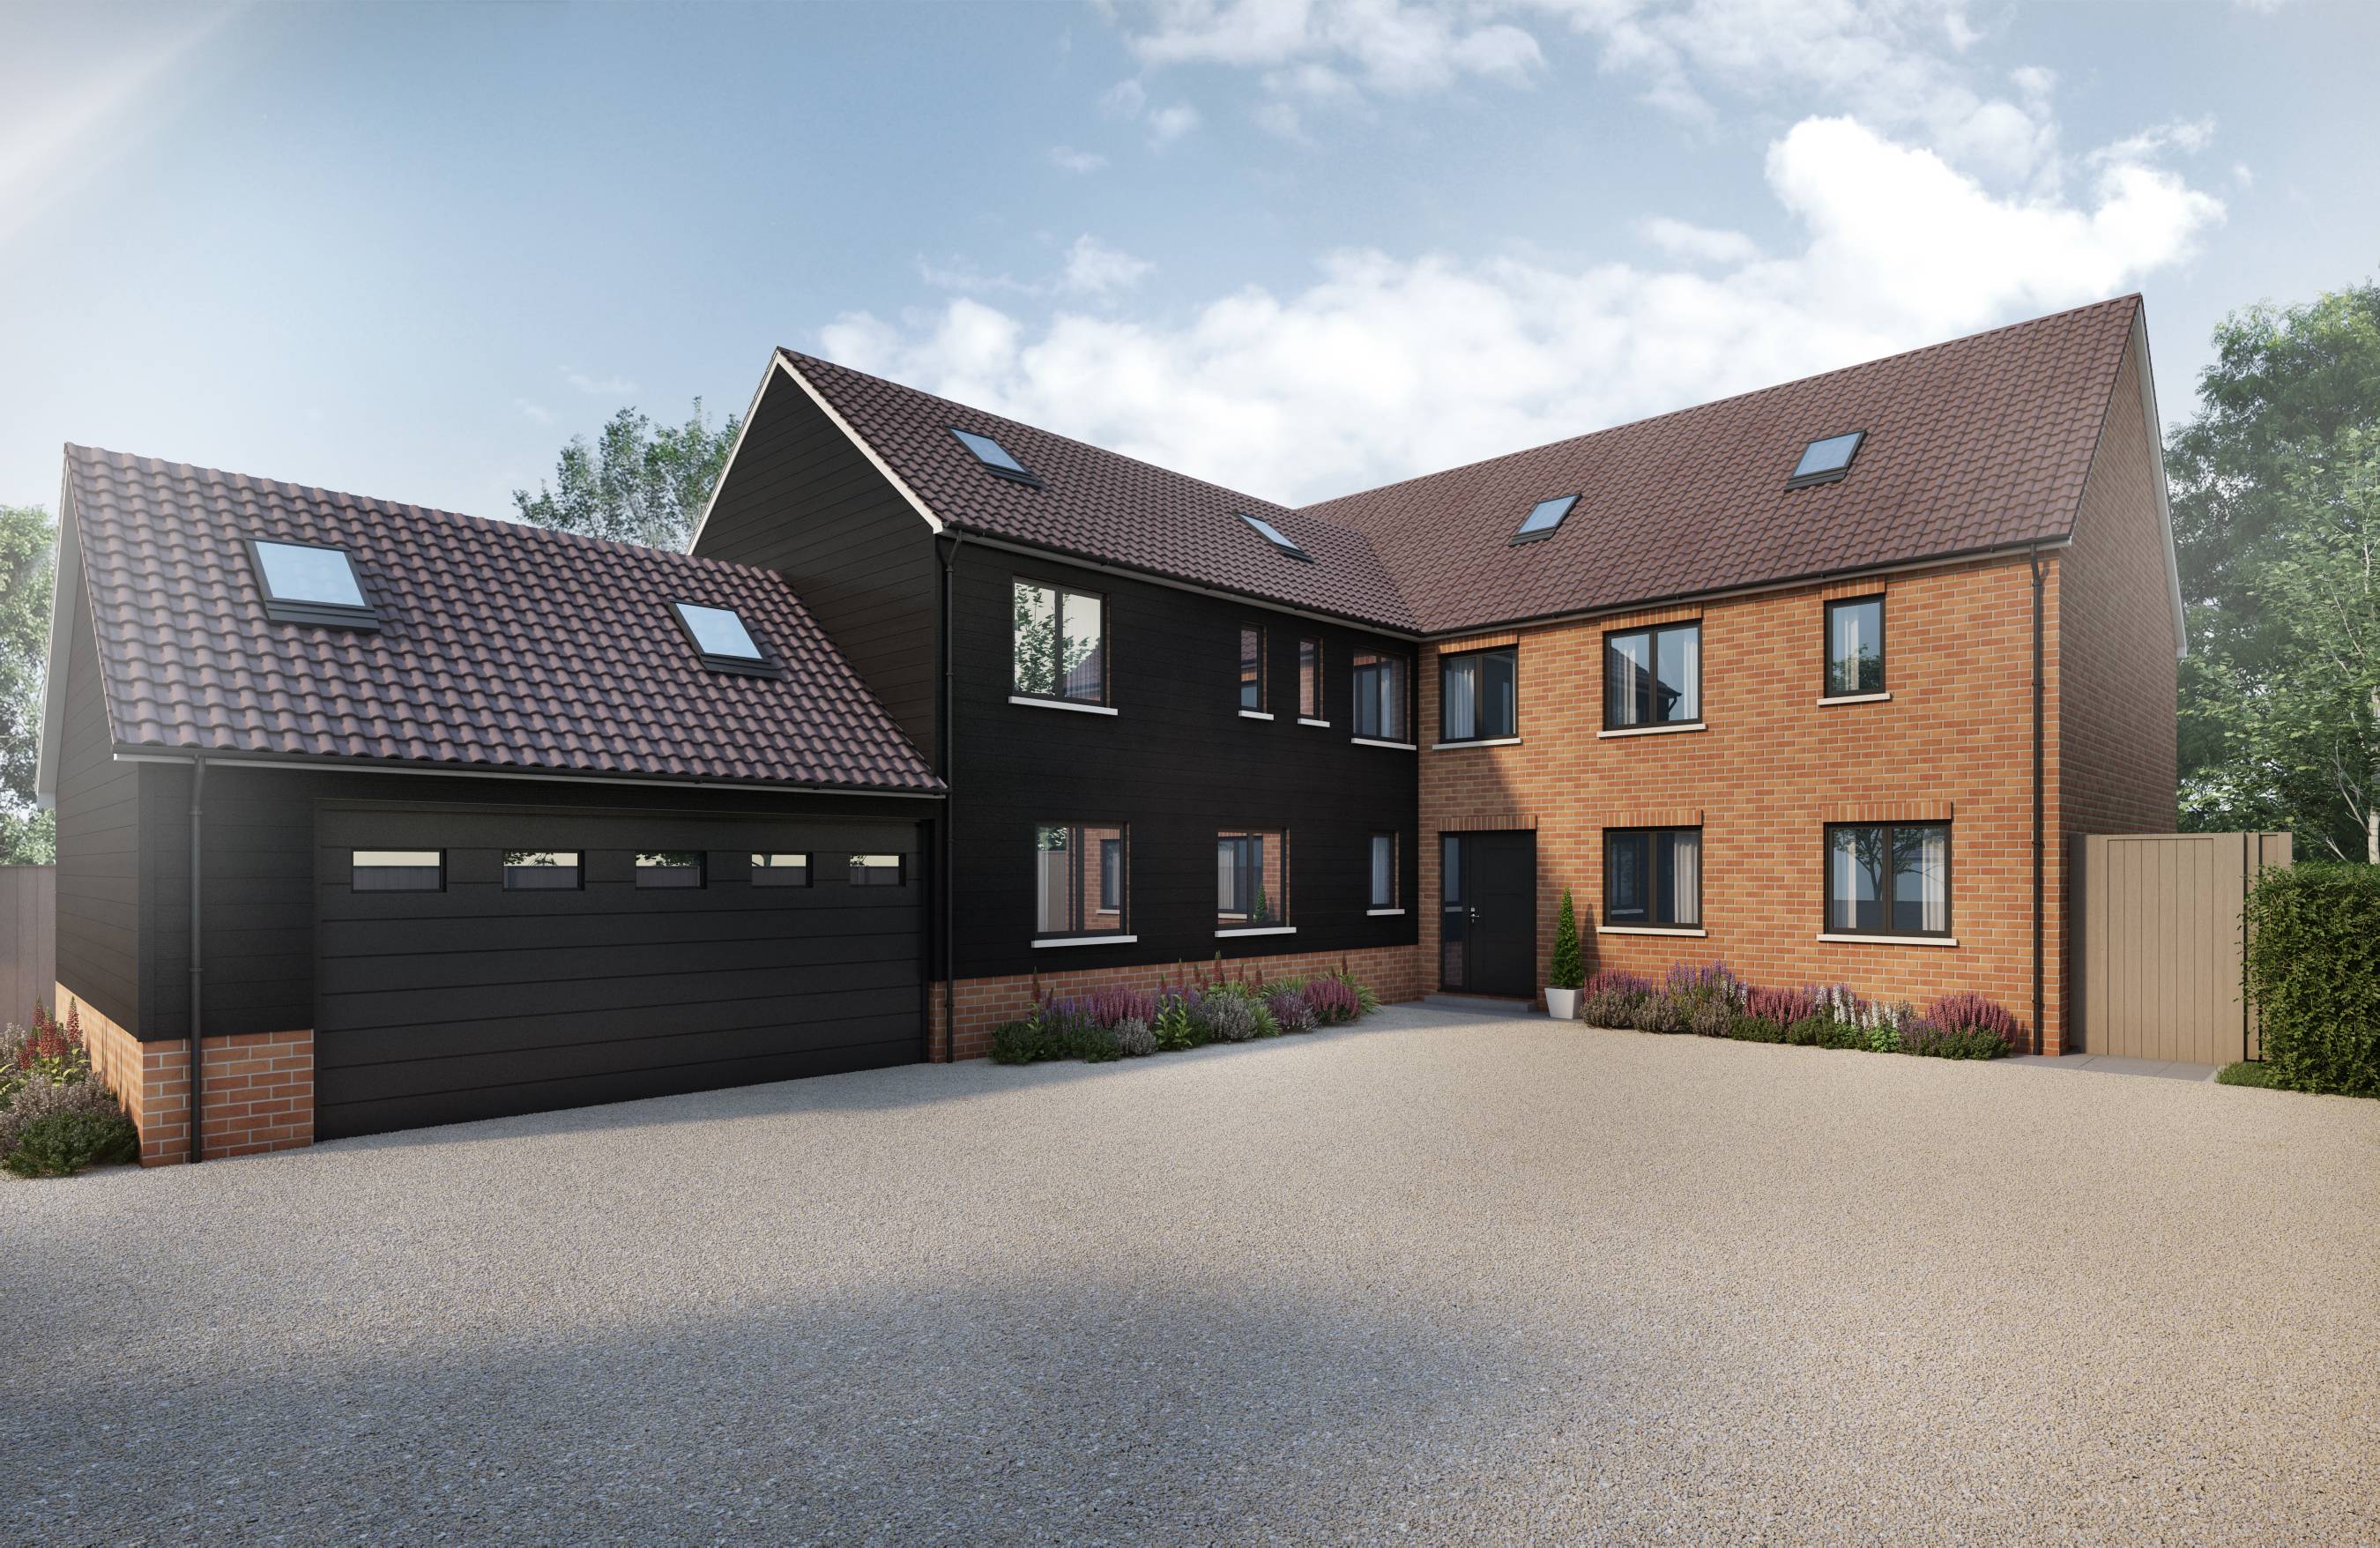 NEW BUILD, STUNNING DETACHED, 6 BEDROOM, 5 BATHROOM HOUSE LOCATED IN THE PICTURESQUE VILLAGE OF  DODDINGTON.